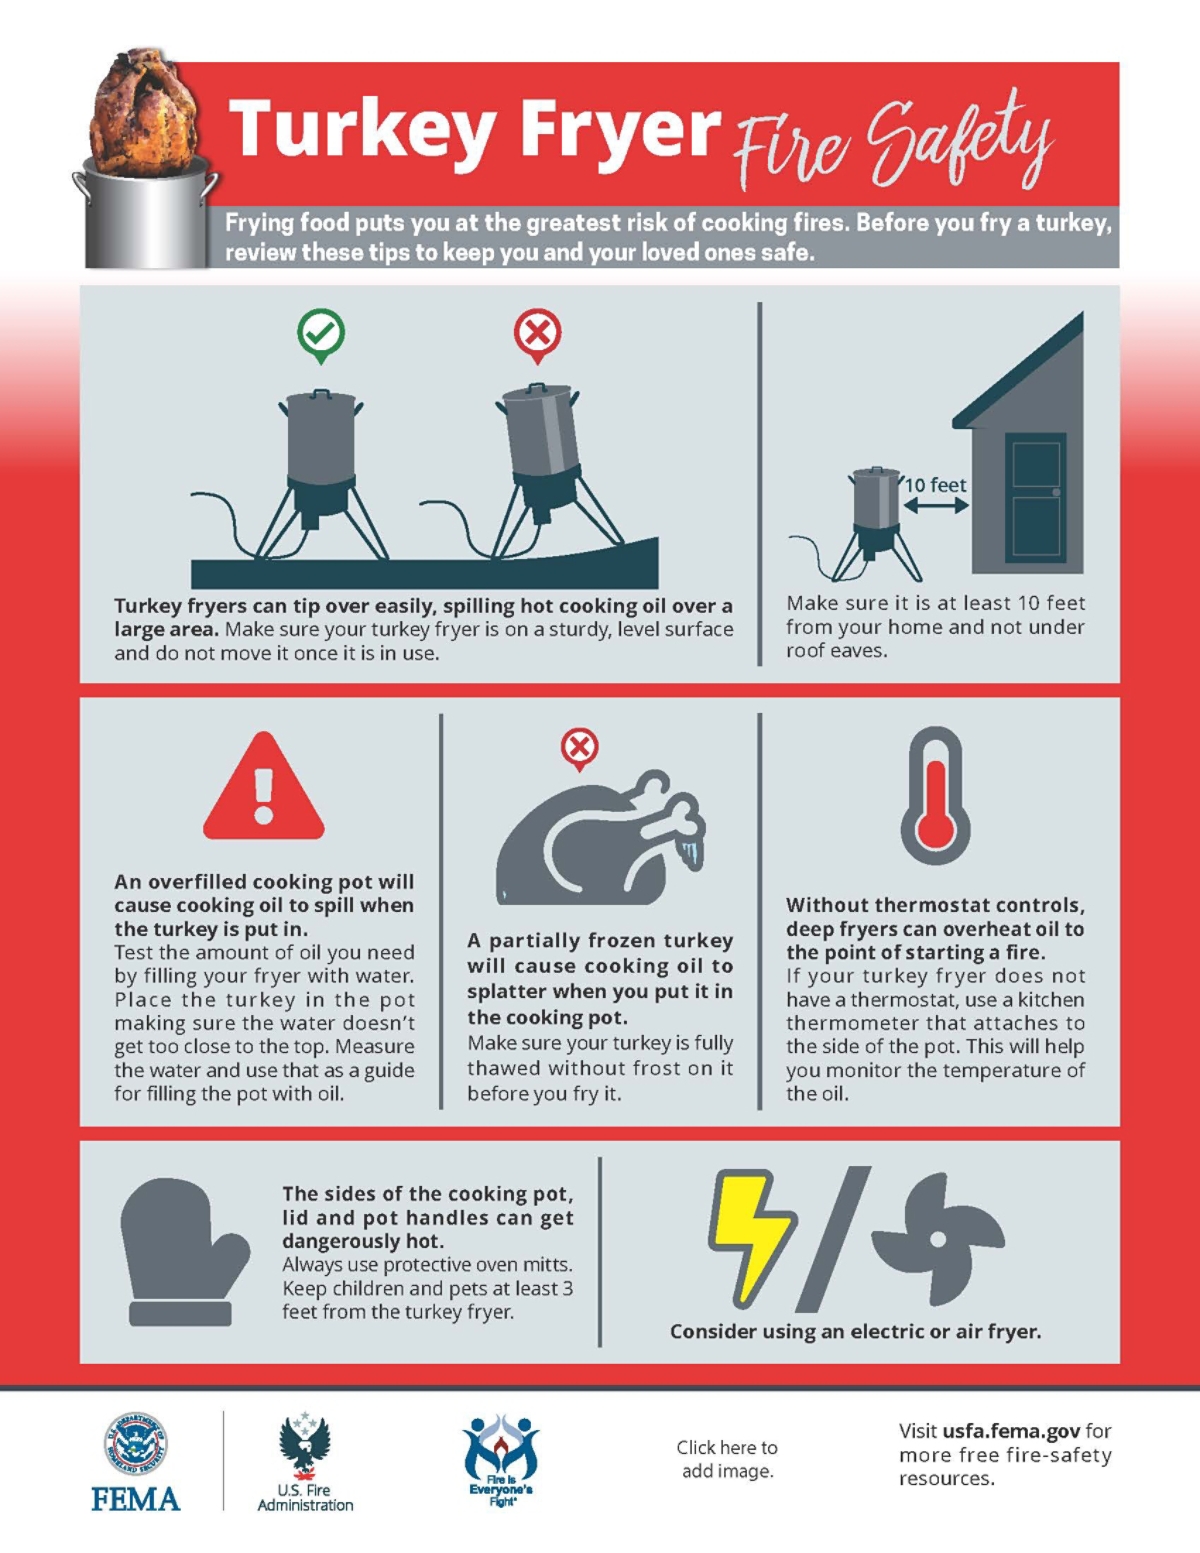 https://s7d1.scene7.com/is/image/isp/turkey-fryer-fire-safety-infographic?qlt=100&wid=1200&ts=1699504203474&$ImageComponent$&fit=constrain